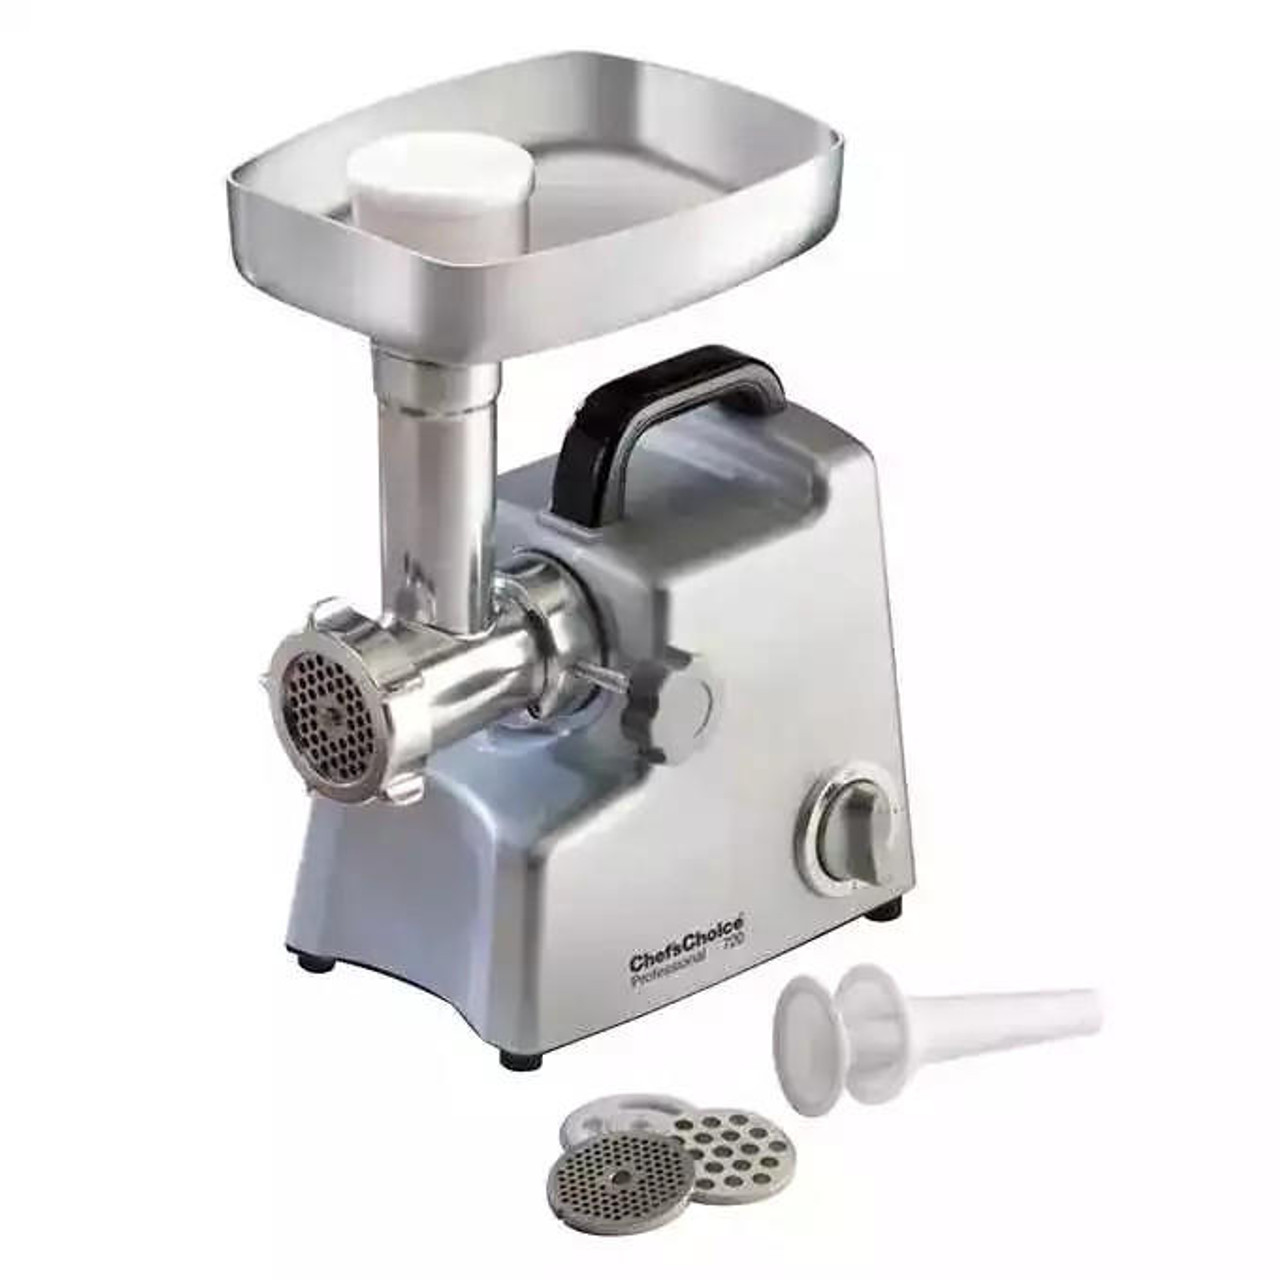 Chef's CP Professional Food and Meat Grinder - 400W Power and Versatile Control-Chicken Pieces